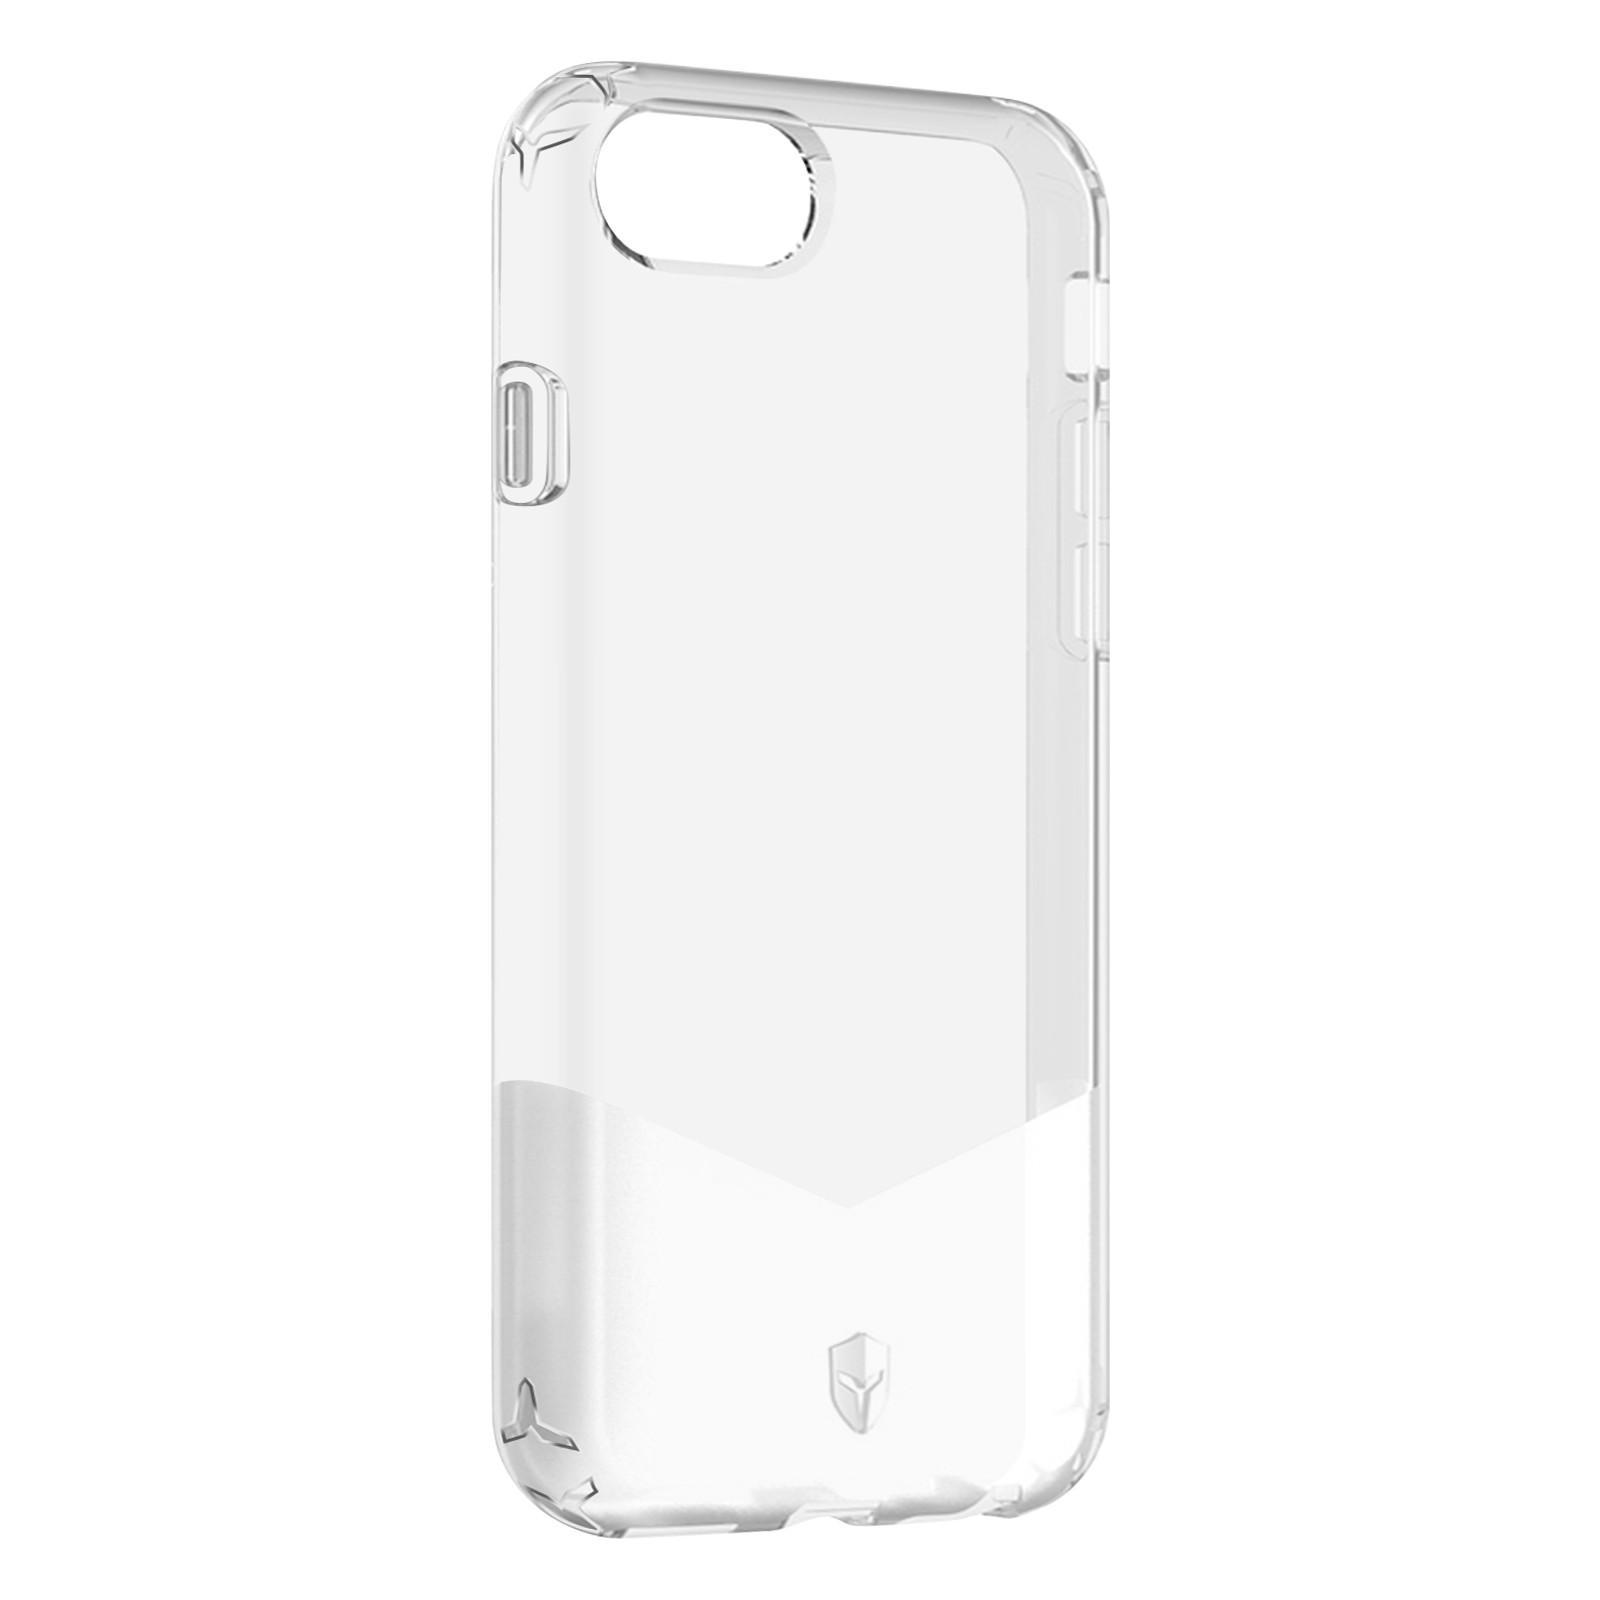 Force Power  Force Case Hülle iPhone SE, 8, 7, 6s, 6 